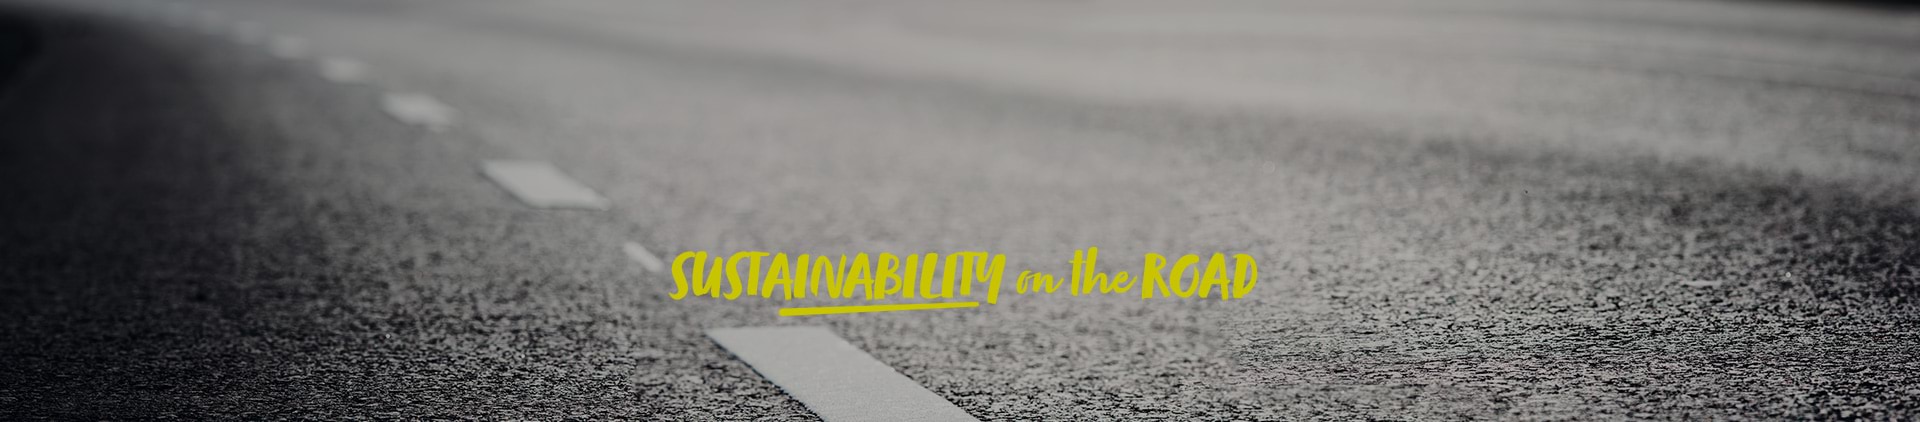 Cover-article-sustainability-on-the-road